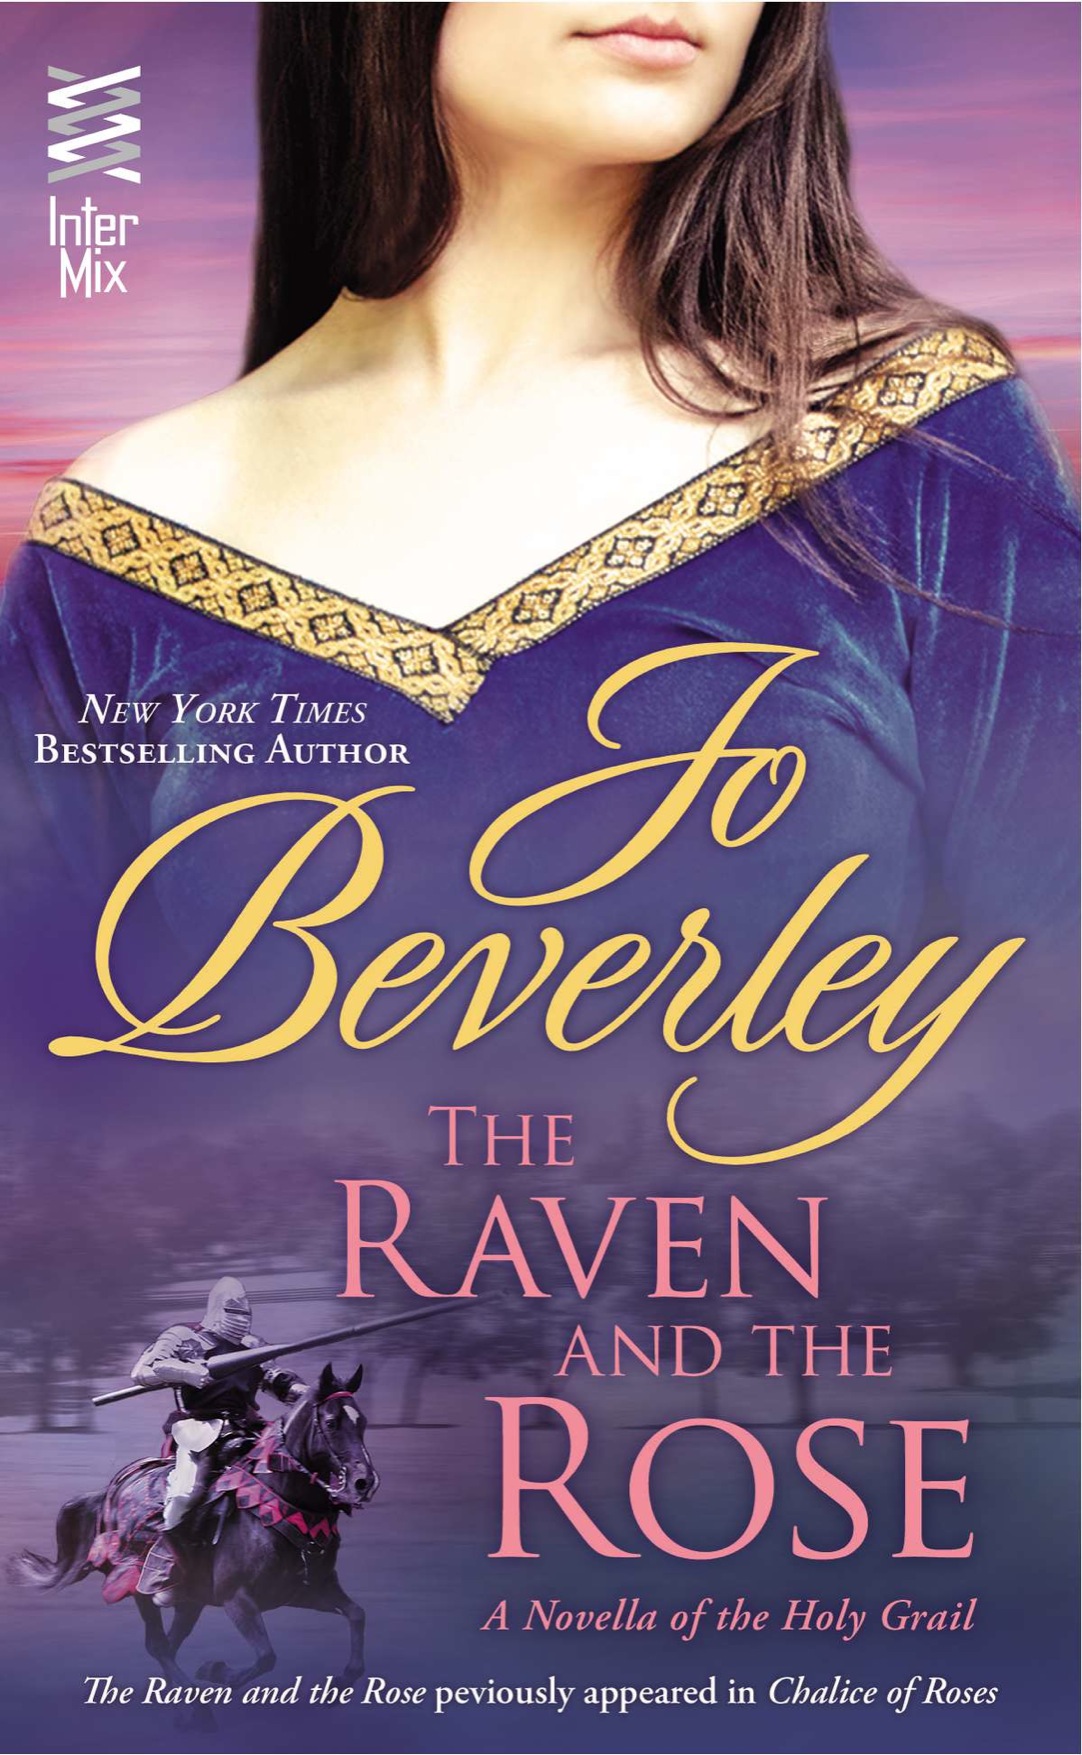 The Raven and the Rose (2014)